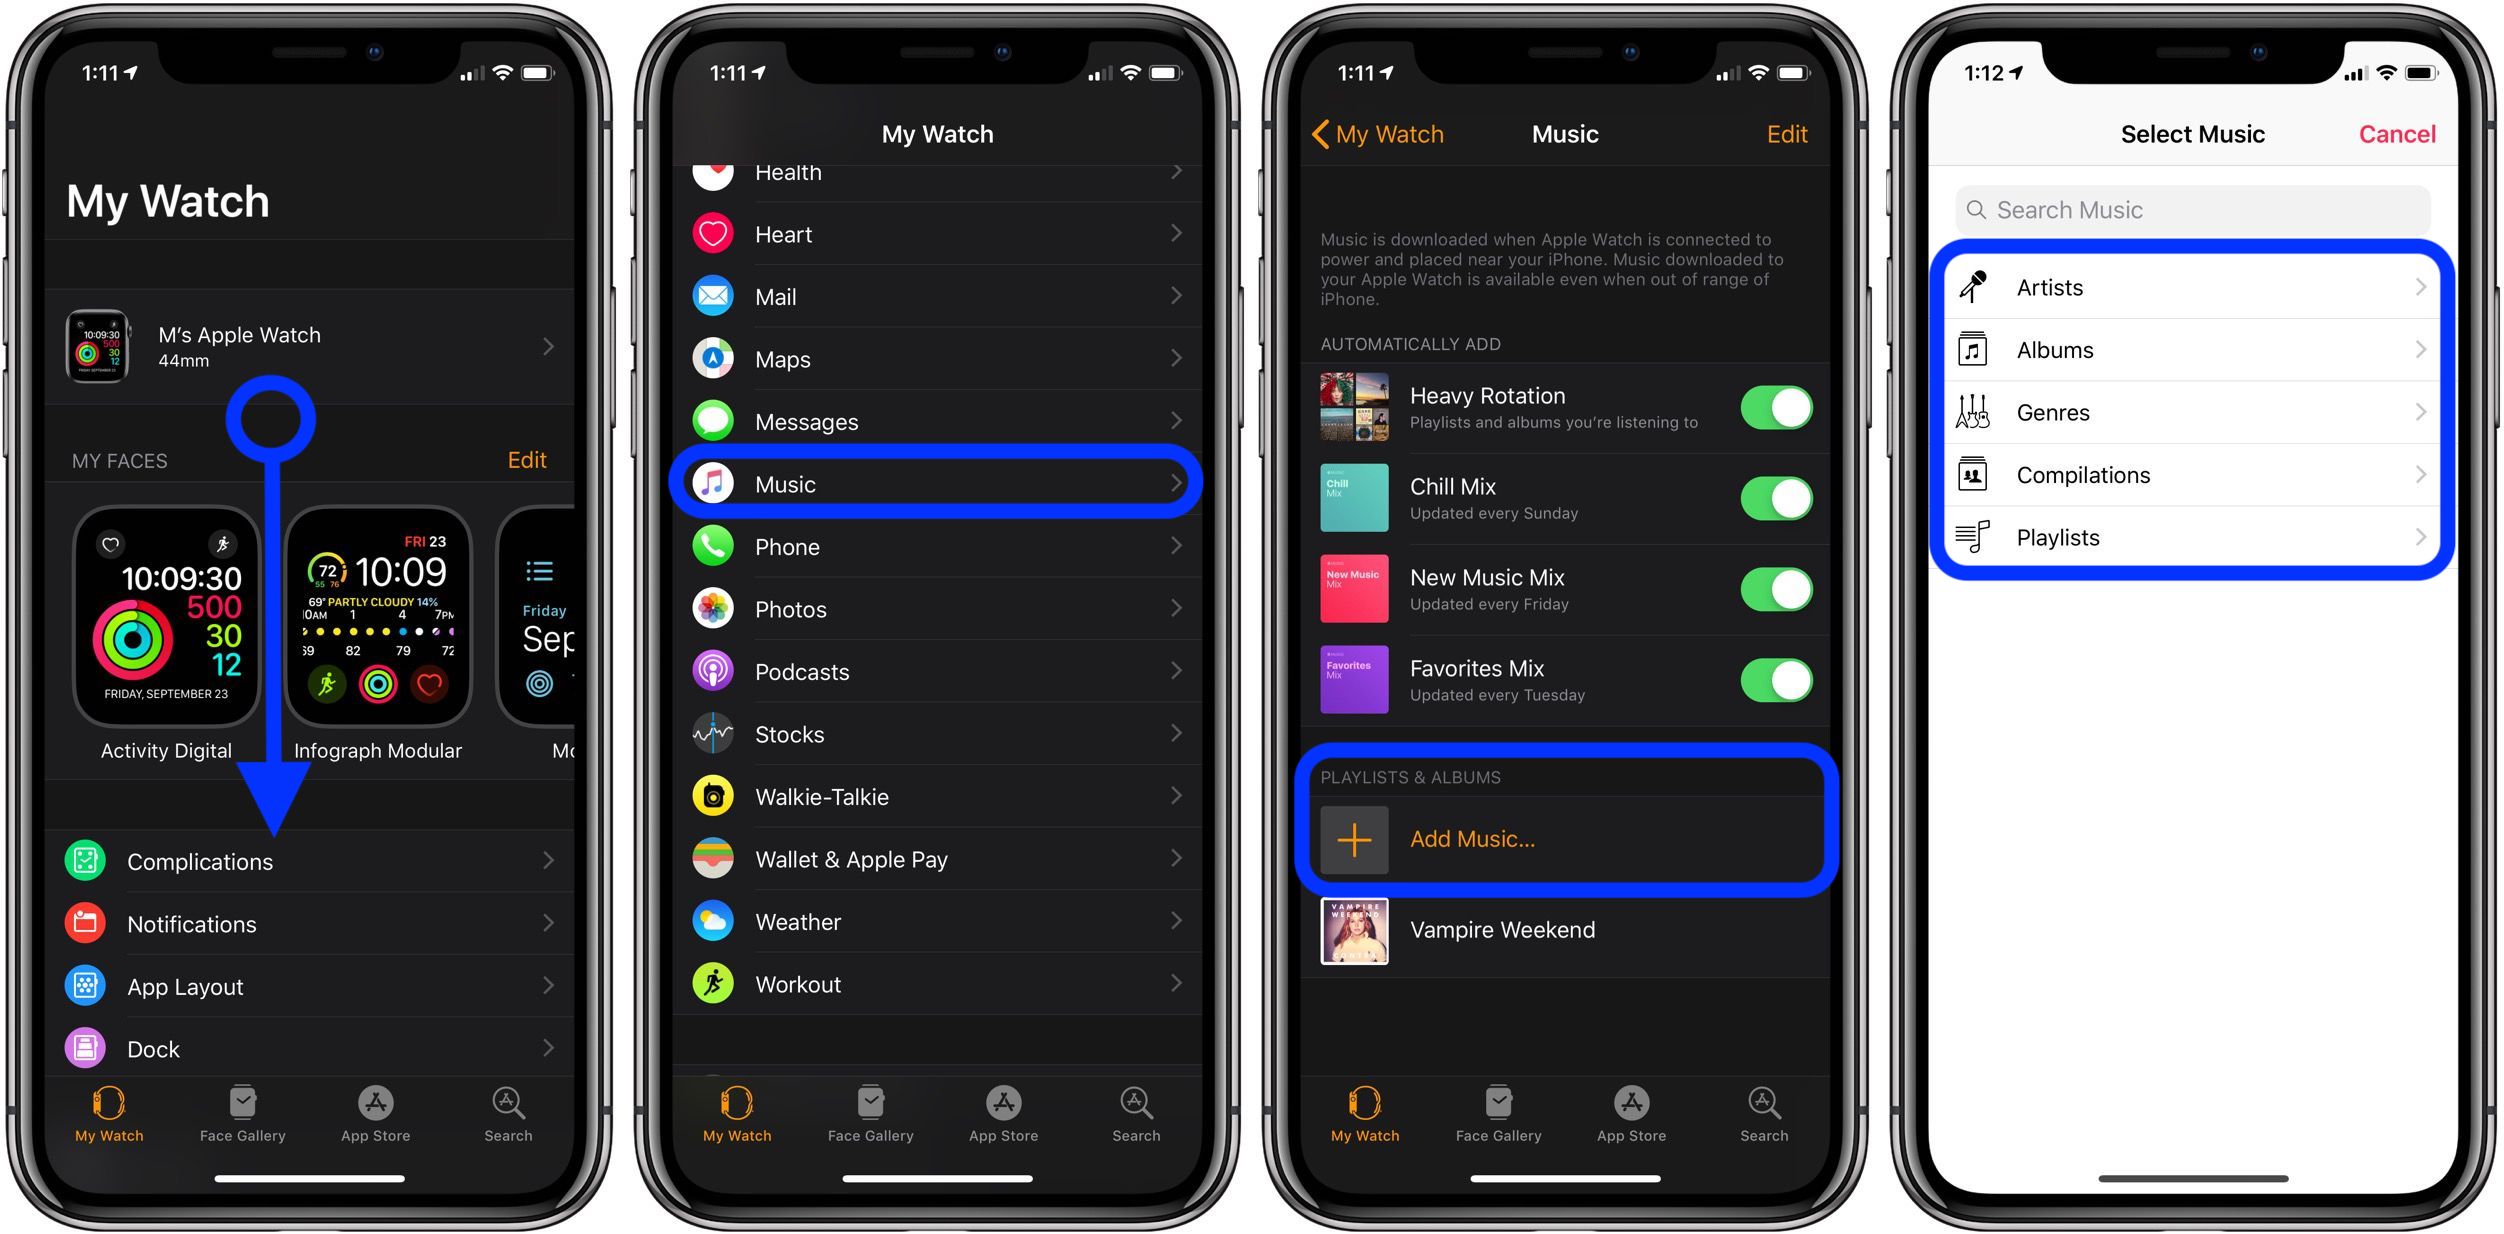 How to sync music and podcasts to Apple Watch from iPhone 9to5Mac